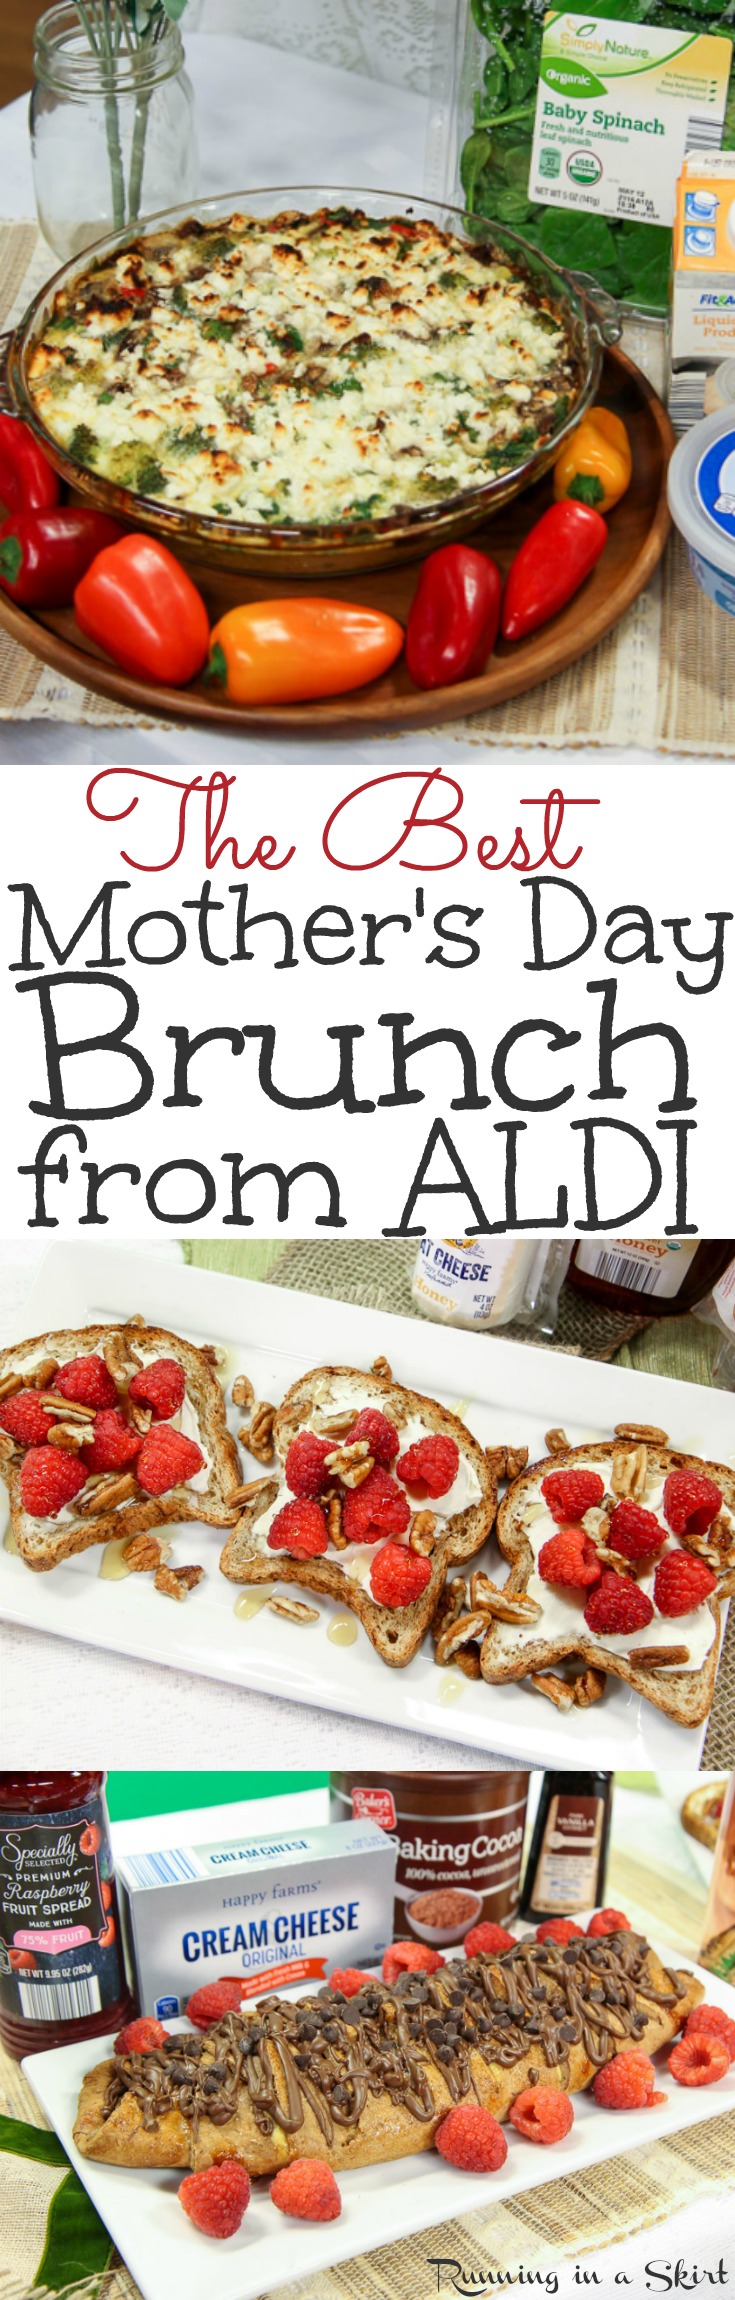 The Best Mother’s Day Brunch recipes and ideas.  Includes awesome decorations for cute buffet food and an easy, healthy menu from ALDI.  Also has drinks like a mimosa bar plus simple savory make ahead eggs casseroles, toast and dessert.  Vegetarian option included. / Running in a Skirt  via @juliewunder